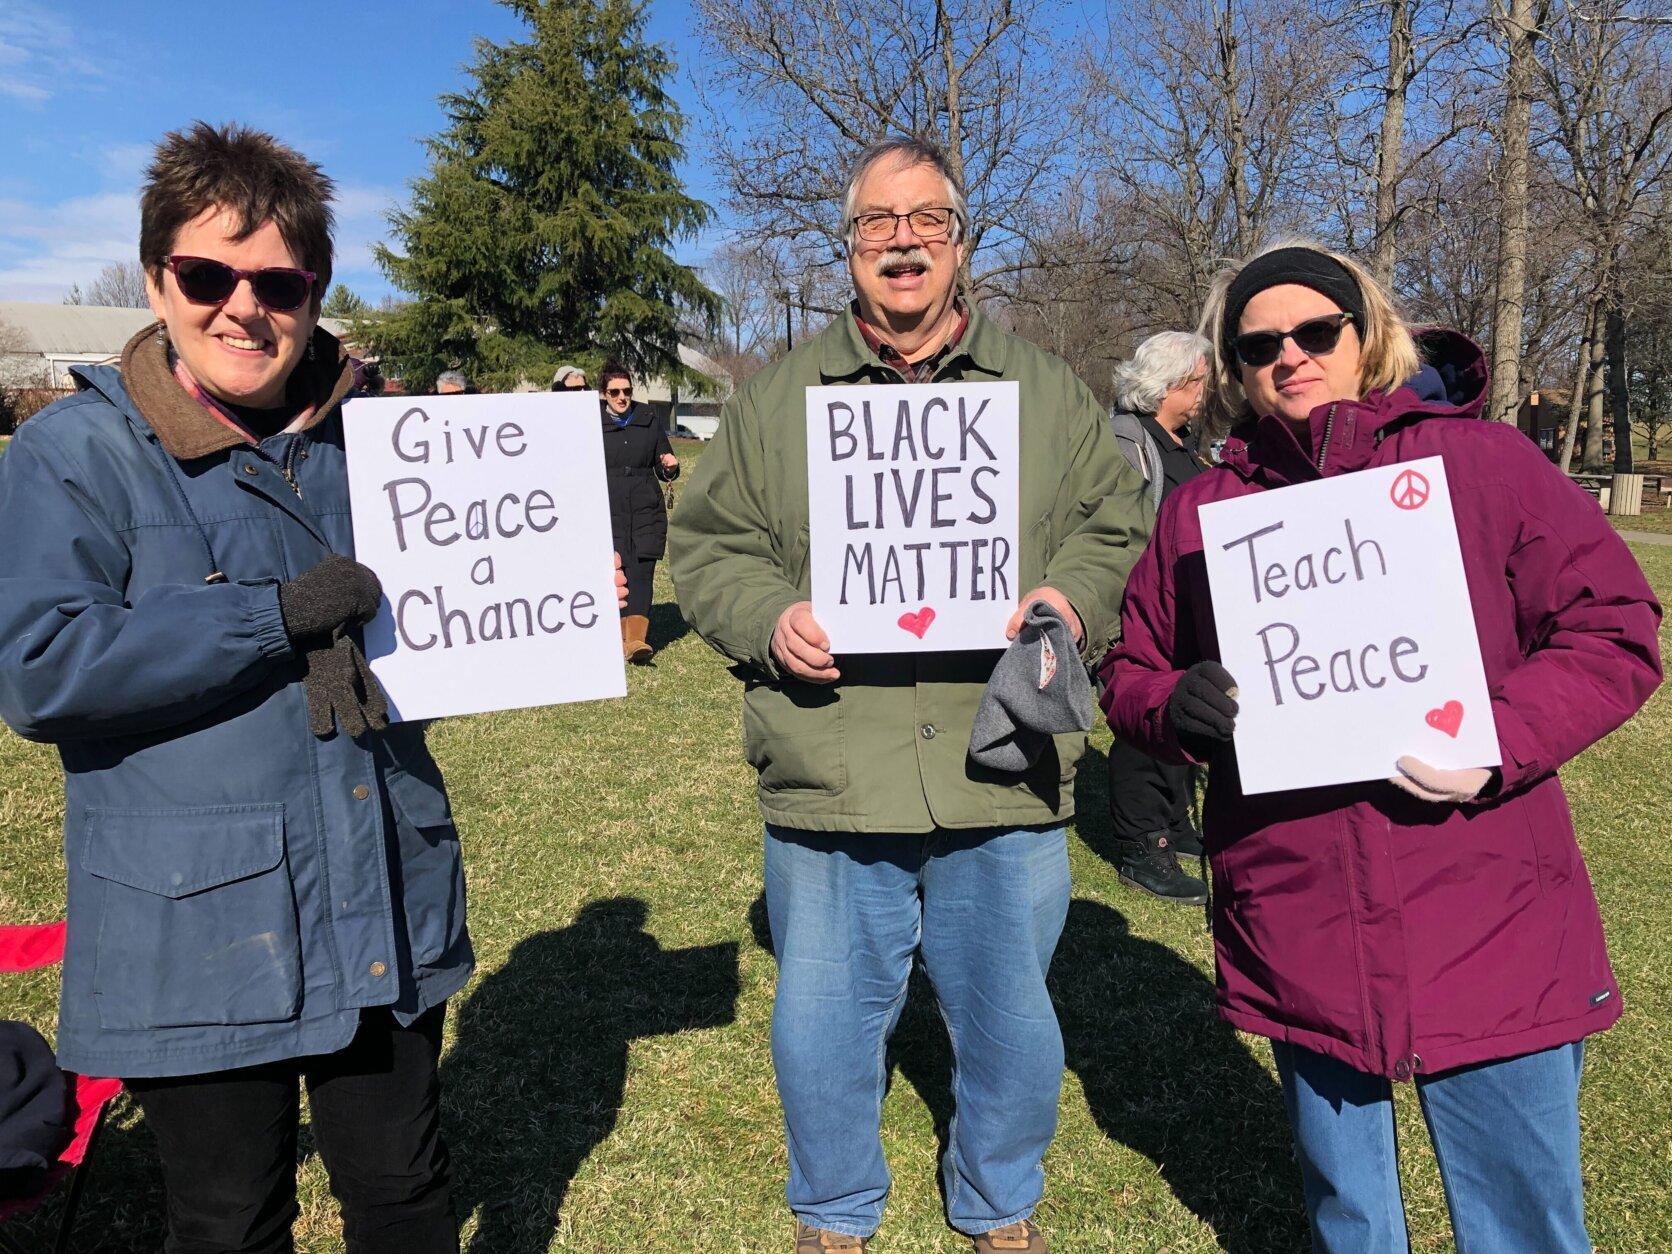 A group gathered in Bowie at Allen Pond Park on Sunday for a peace rally.